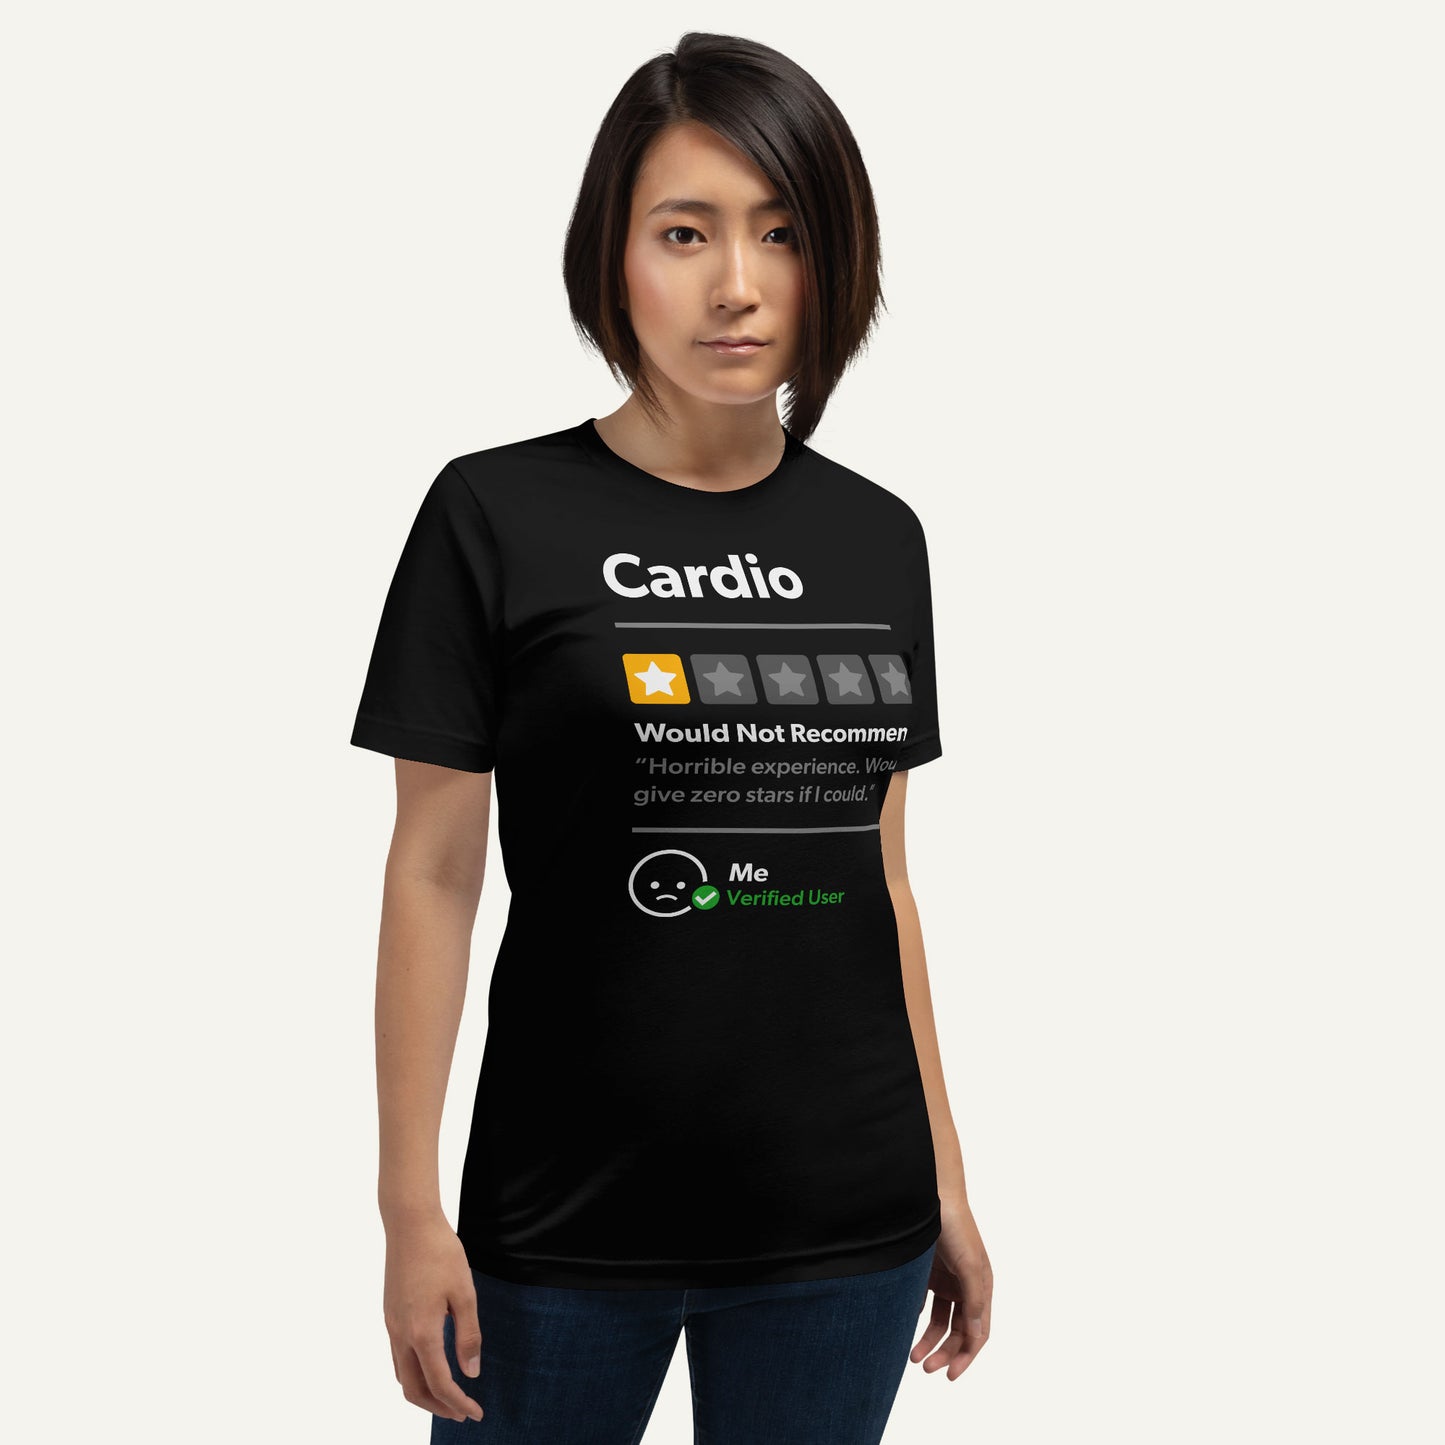 Cardio 1 Star Would Not Recommend Men's Standard T-Shirt